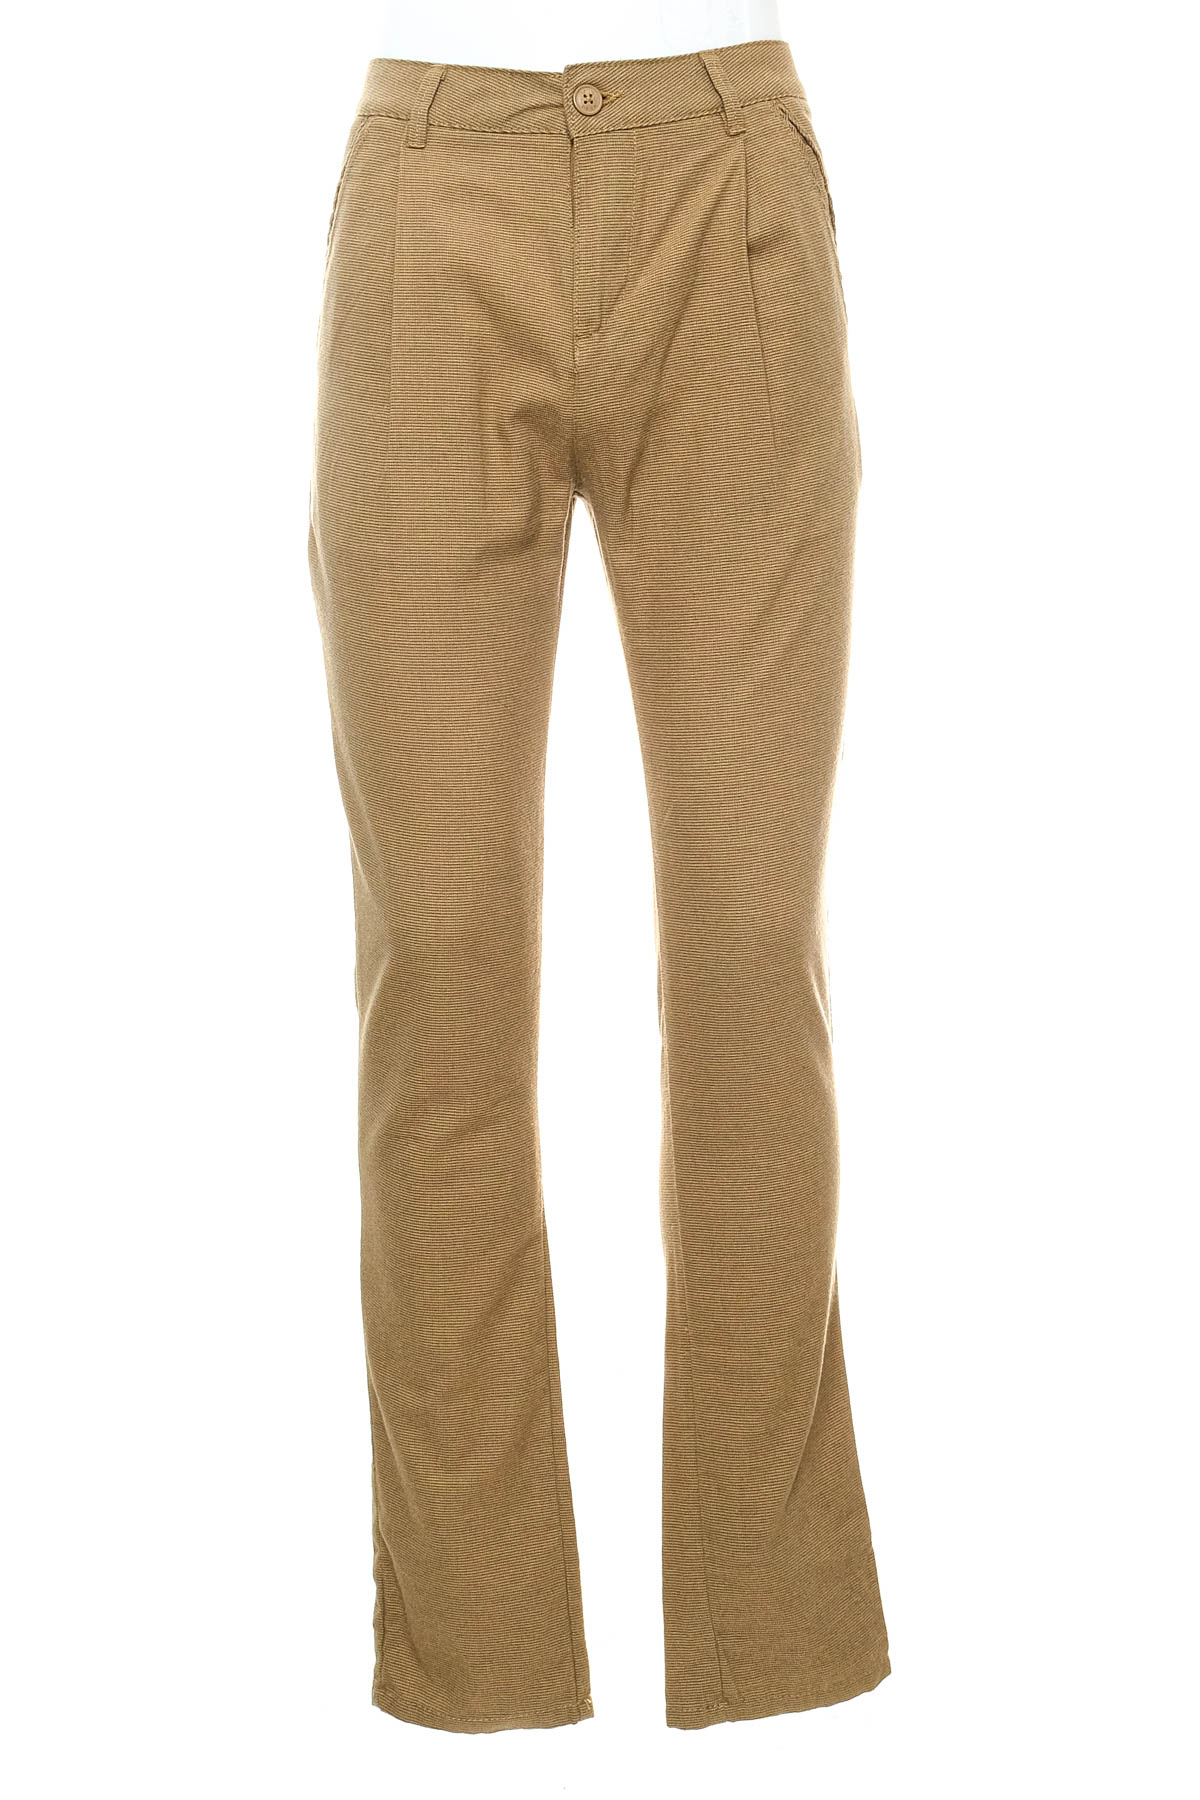 Trousers for boy - Max - 0